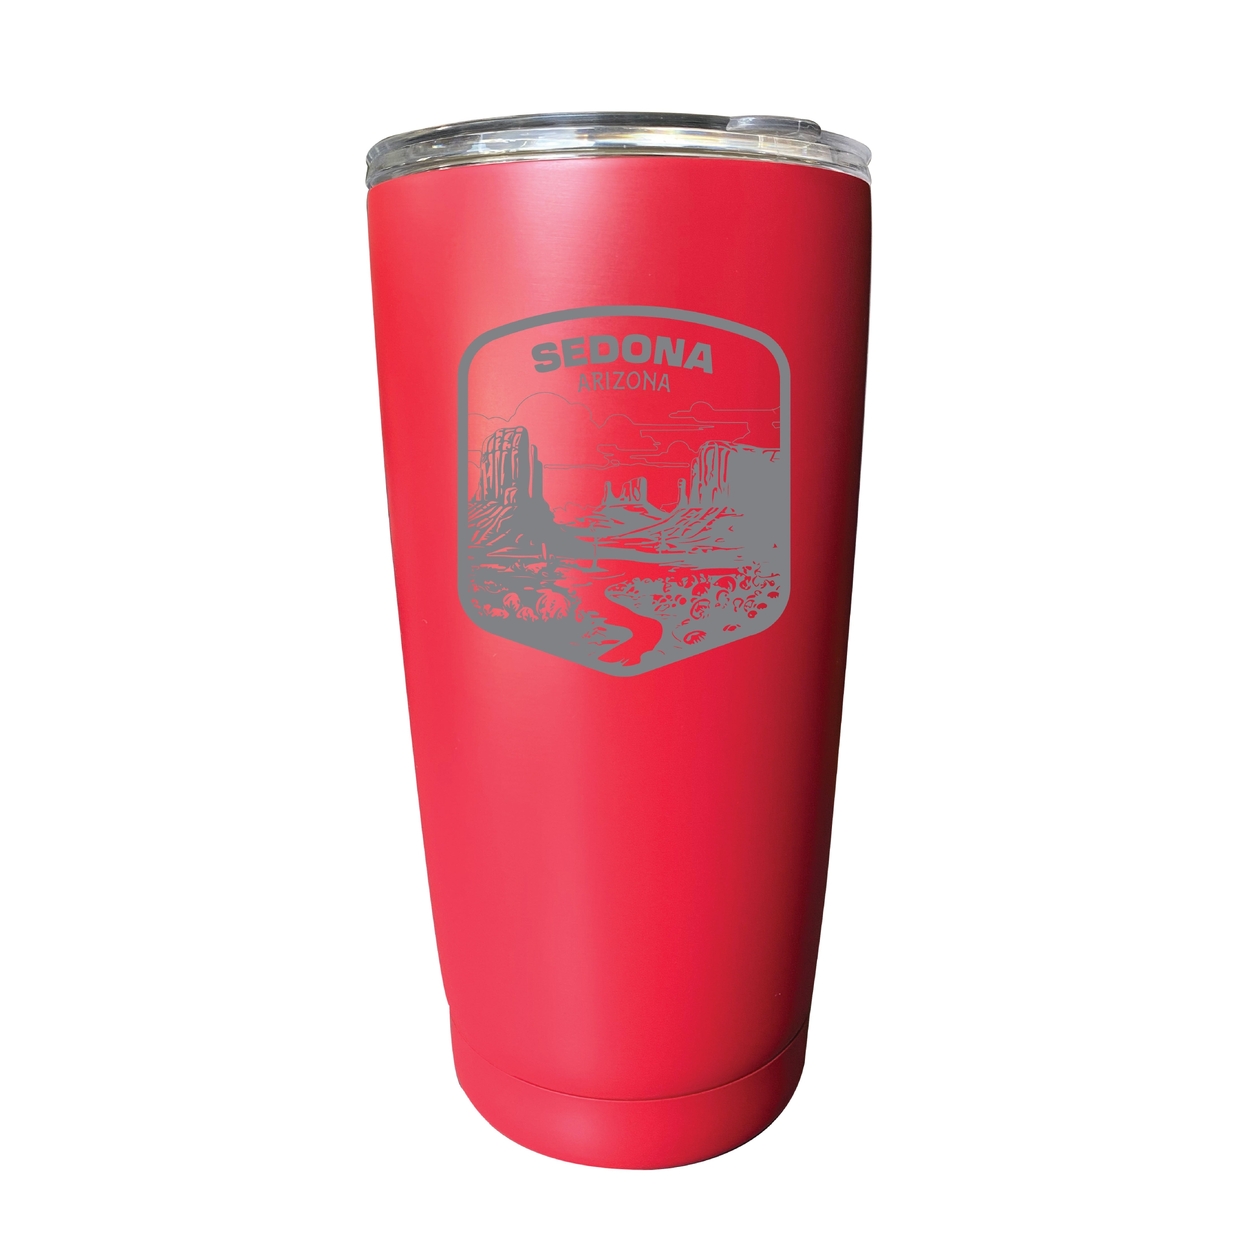 Sedona Arizona Souvenir 16 Oz Engraved Stainless Steel Insulated Tumbler - Red,,4-Pack